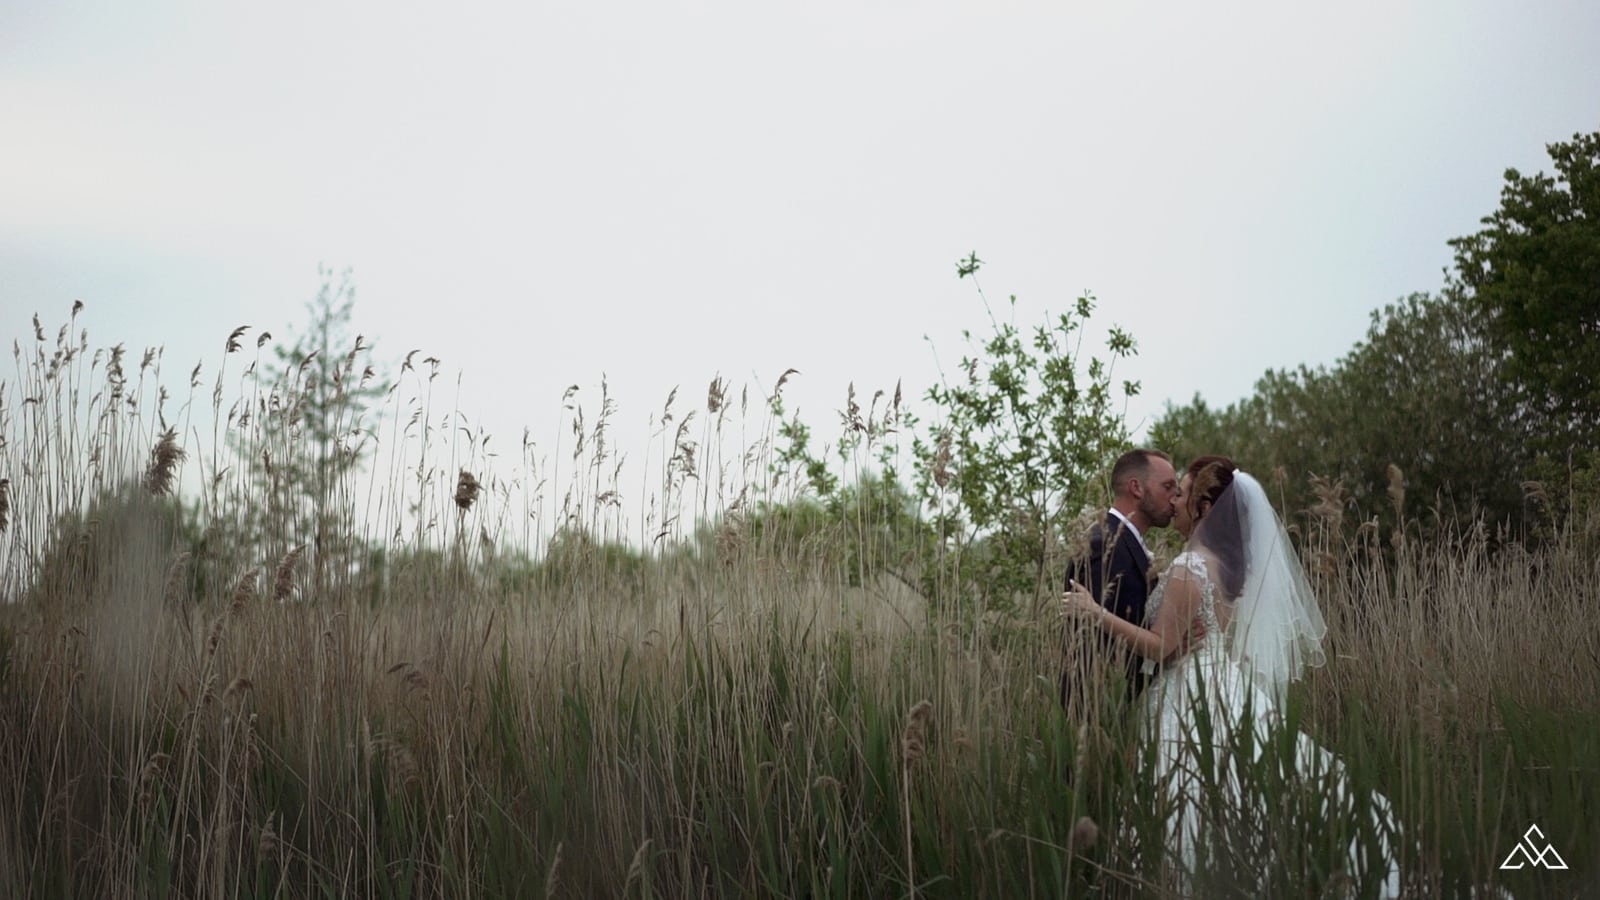 Coastal Vows in Motion: Gold Coast’s Skilled Wedding Videographer